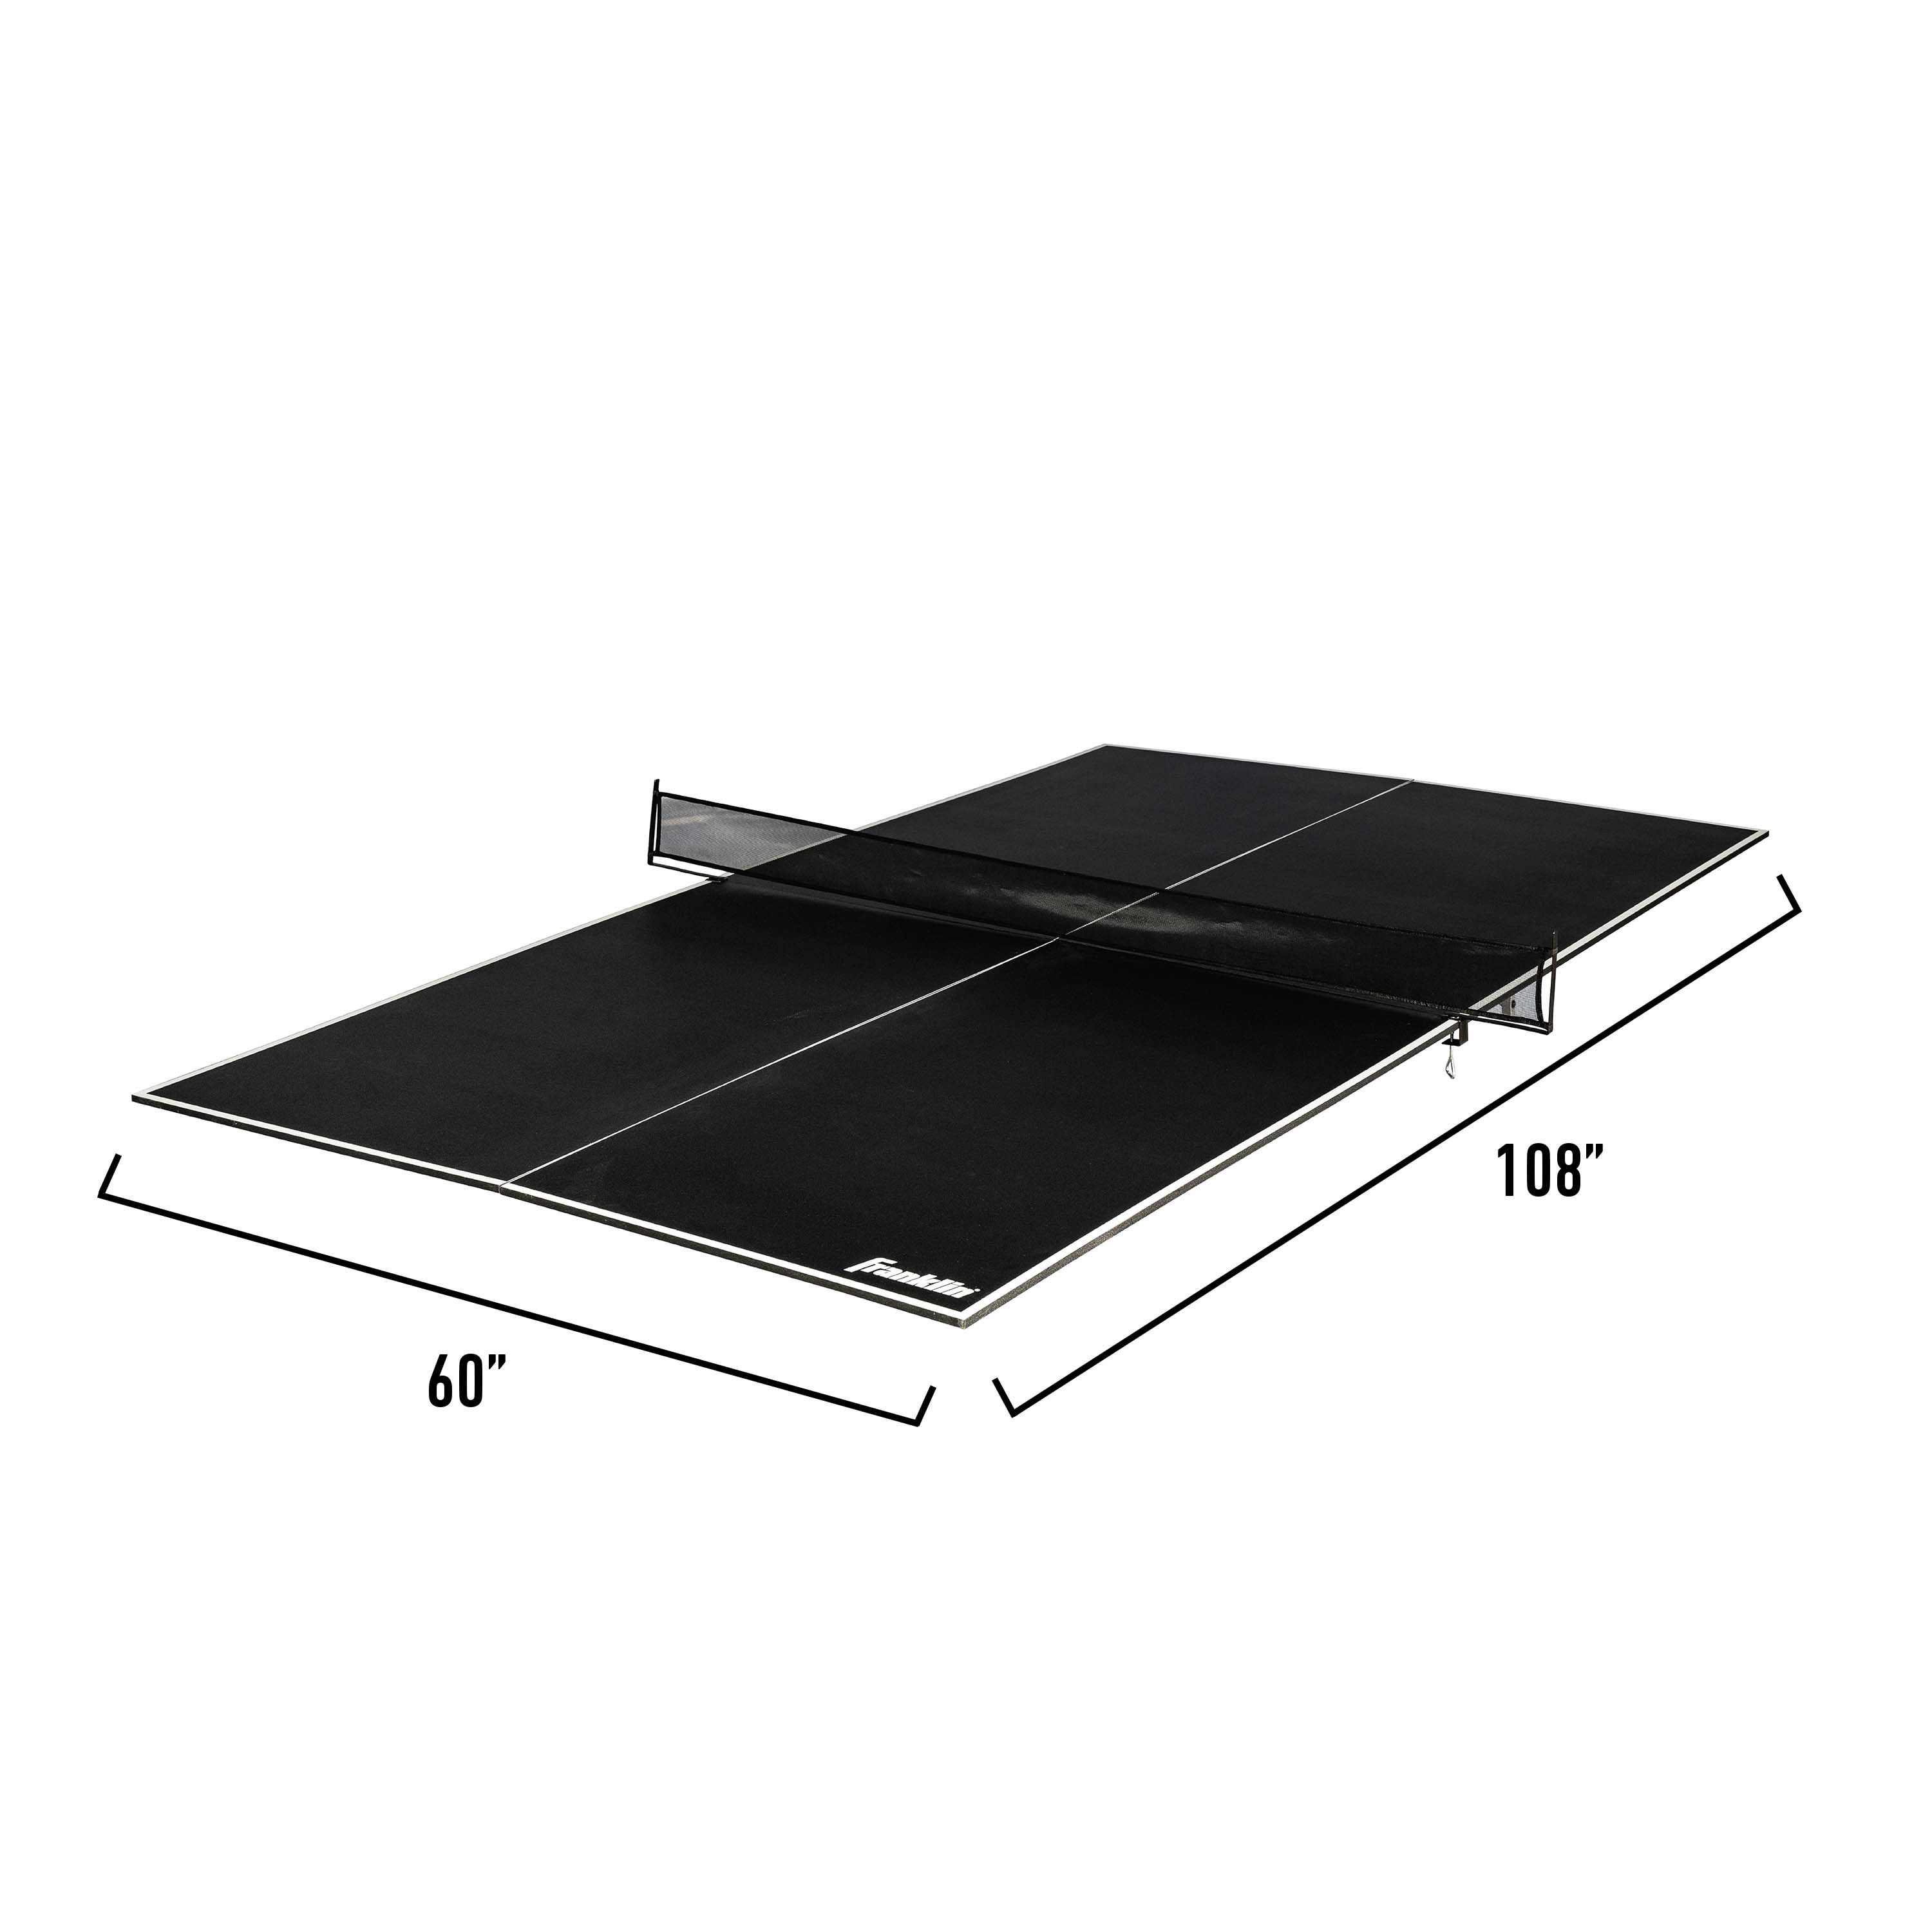 Franklin Sports Easy Assembly Table Tennis Conversion Top - image 2 of 8